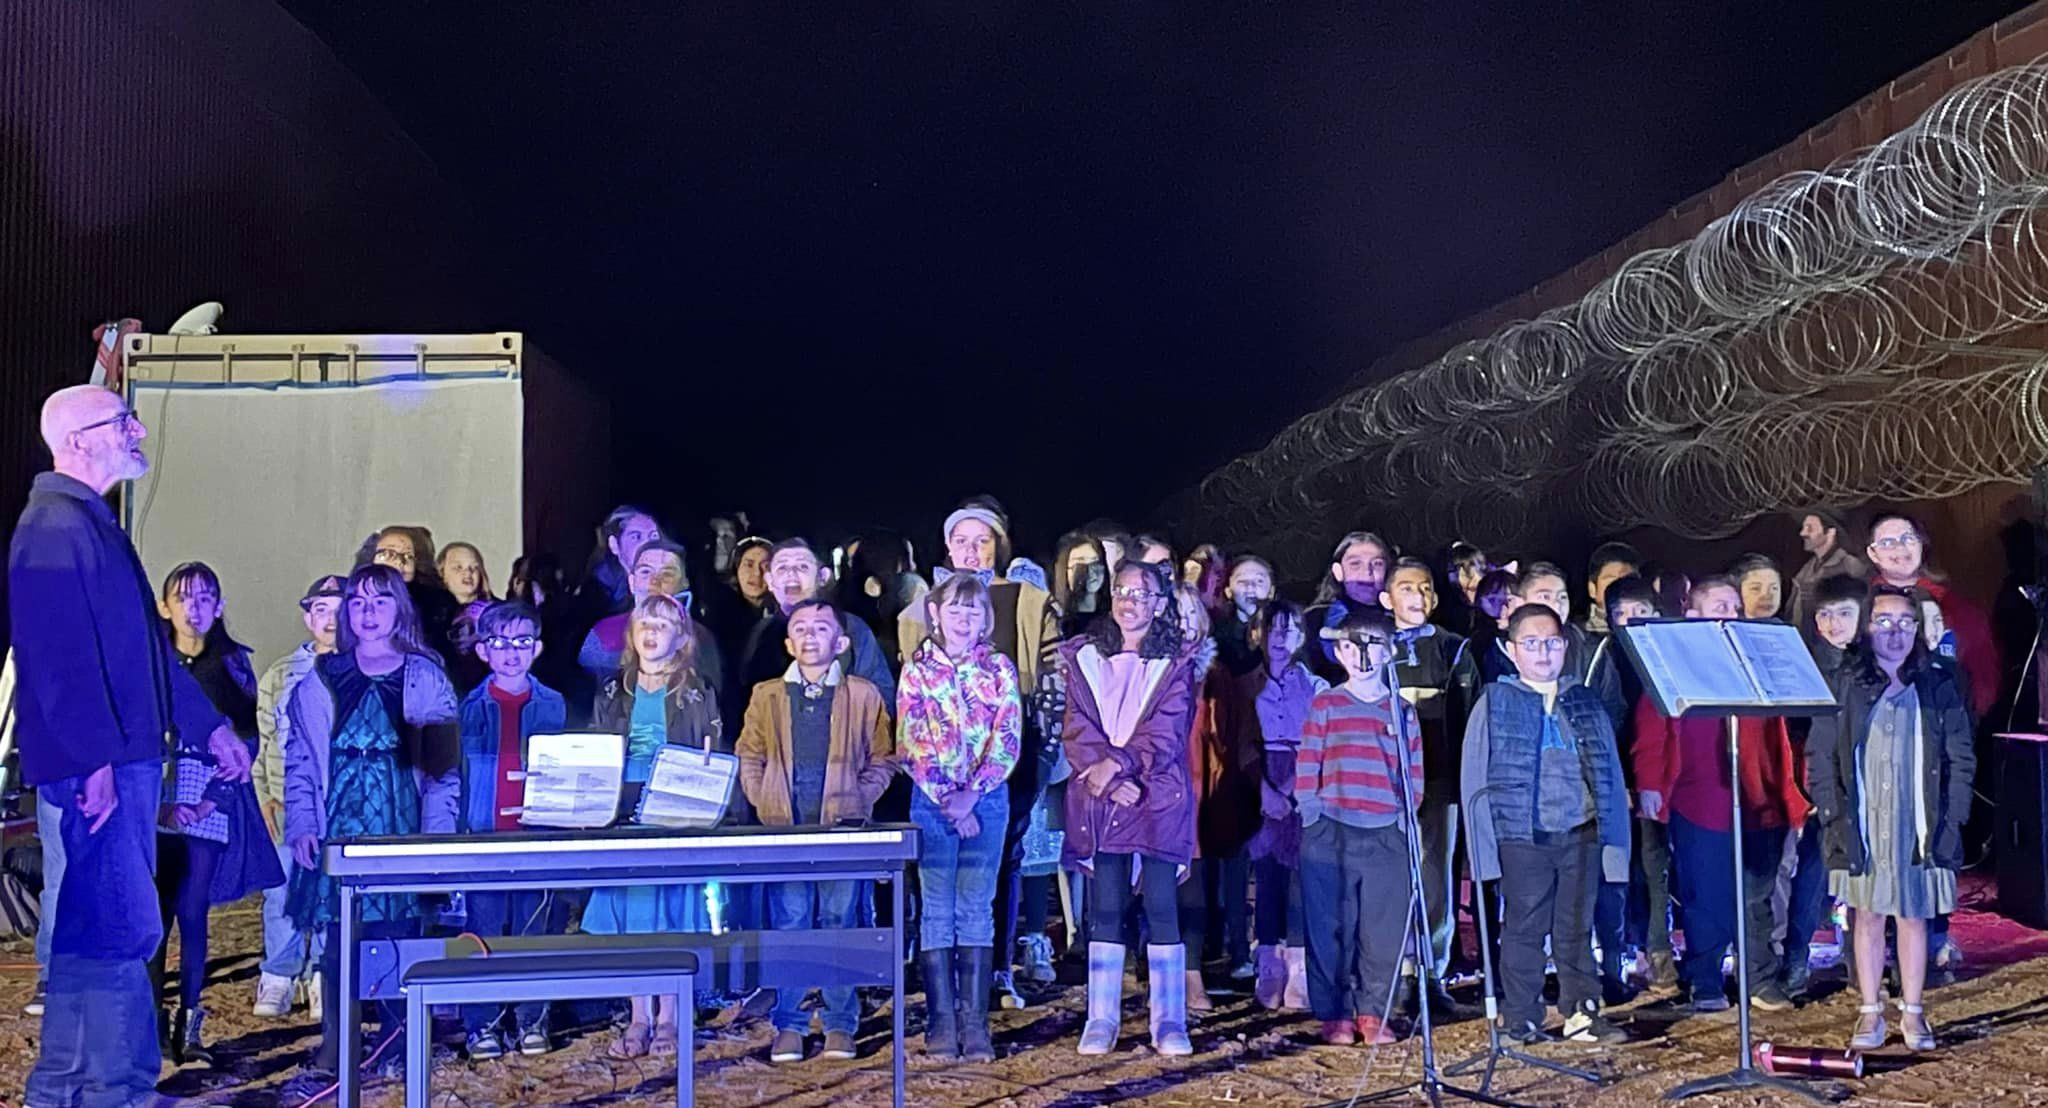 Children sing a concert at the US-Mexico border wall